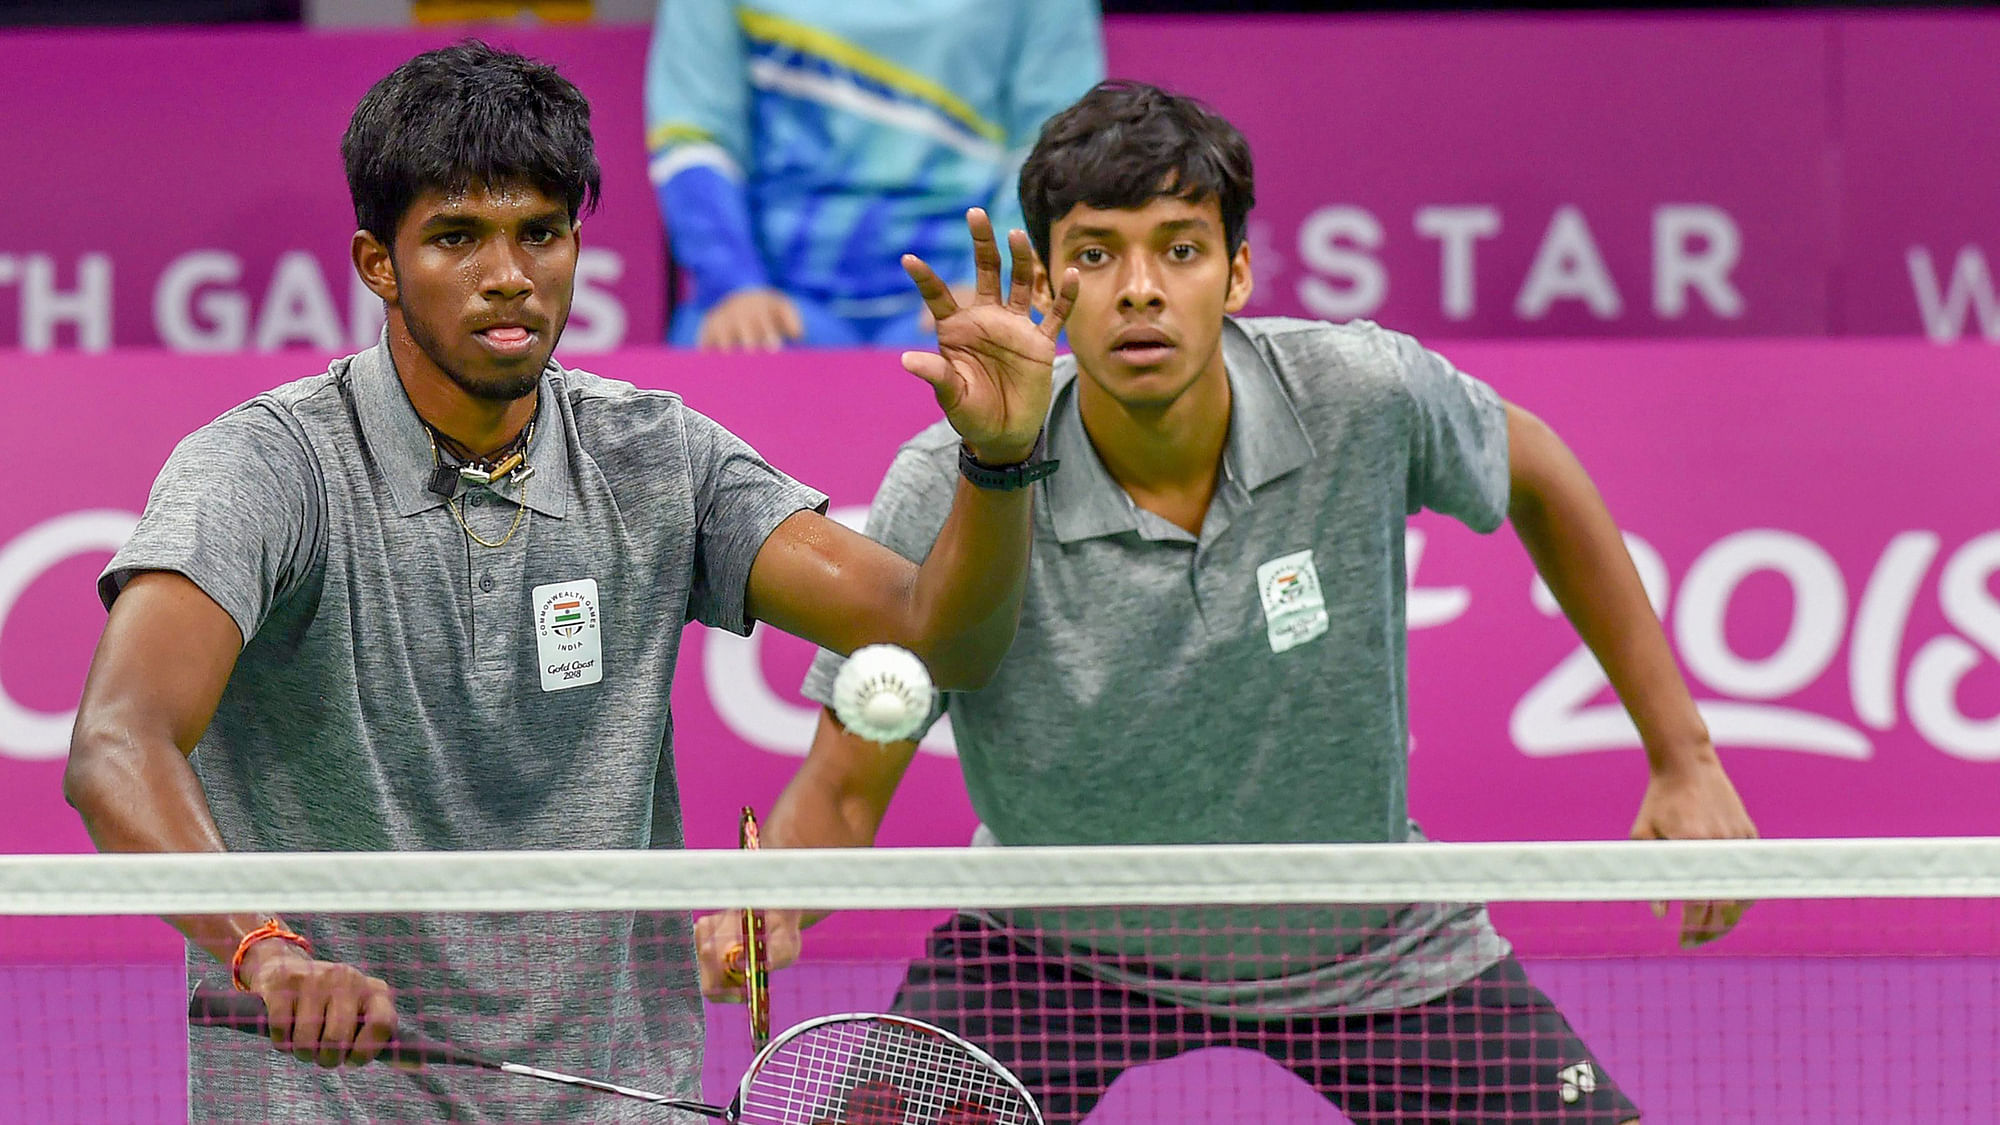 India’s men’s doubles pair of Satwik Rankireddy and Chirag Shetty in action during the 2018 Commonwealth Games.